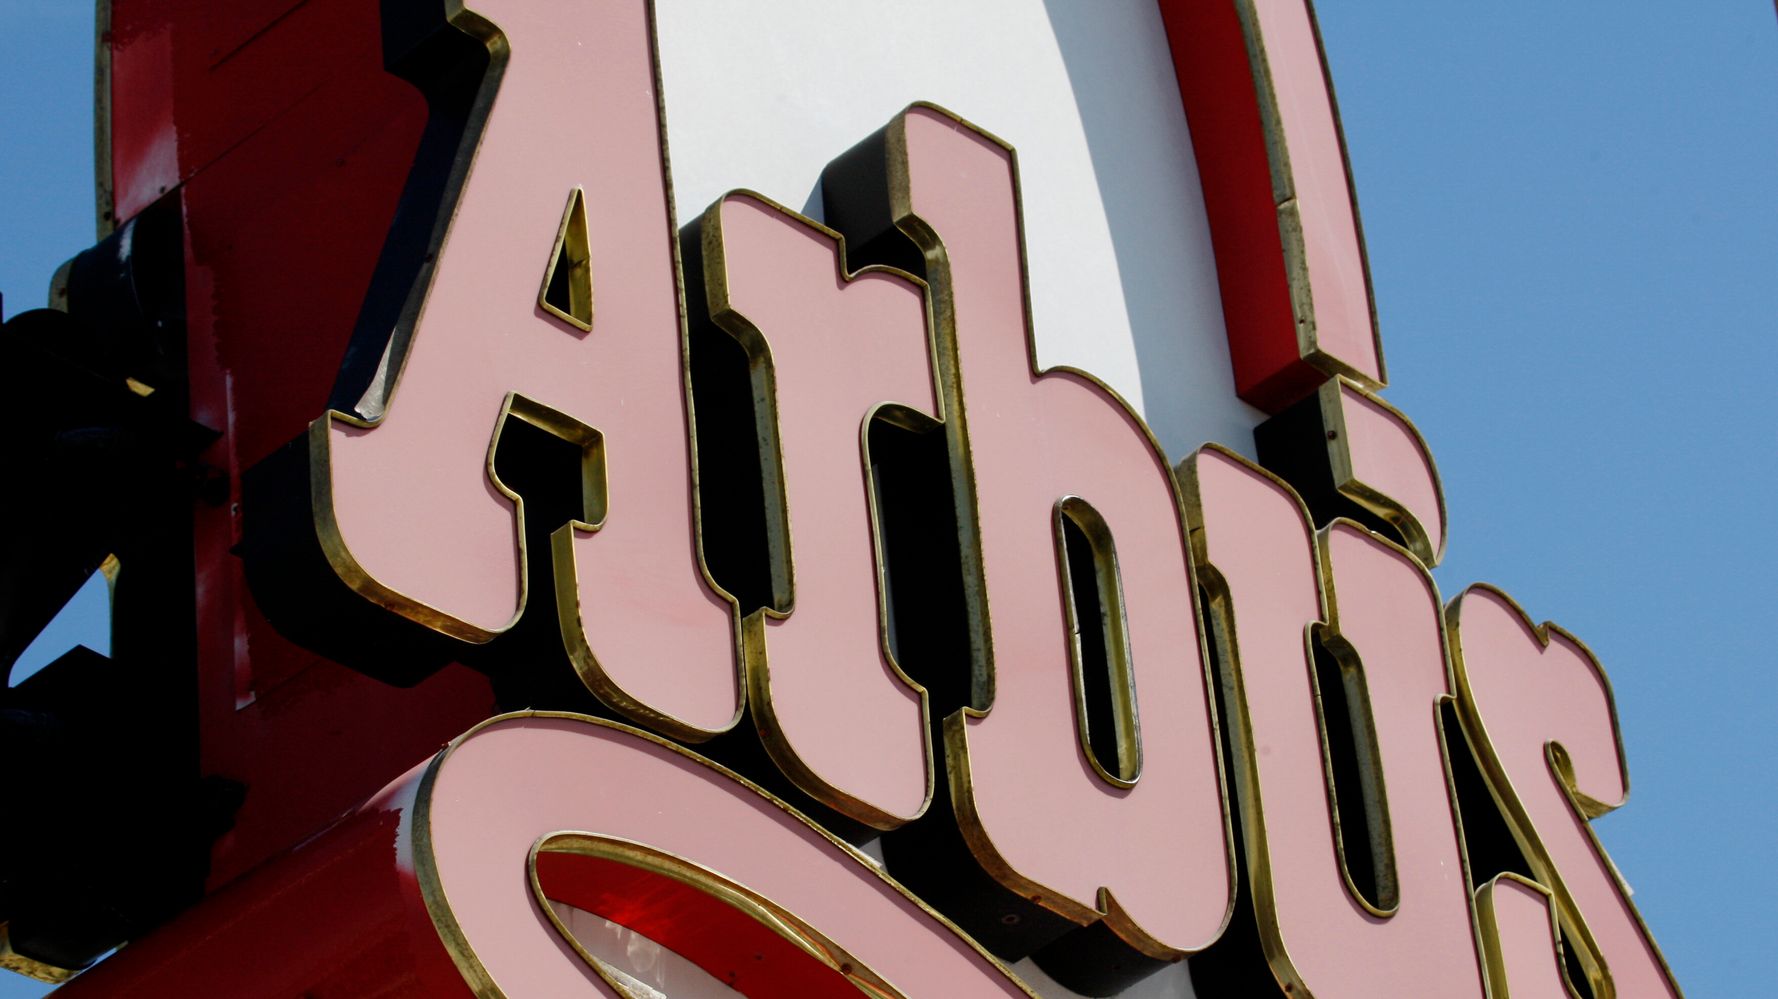 Arby’s Manager In Washington State Peed In Milkshake Mix: Police